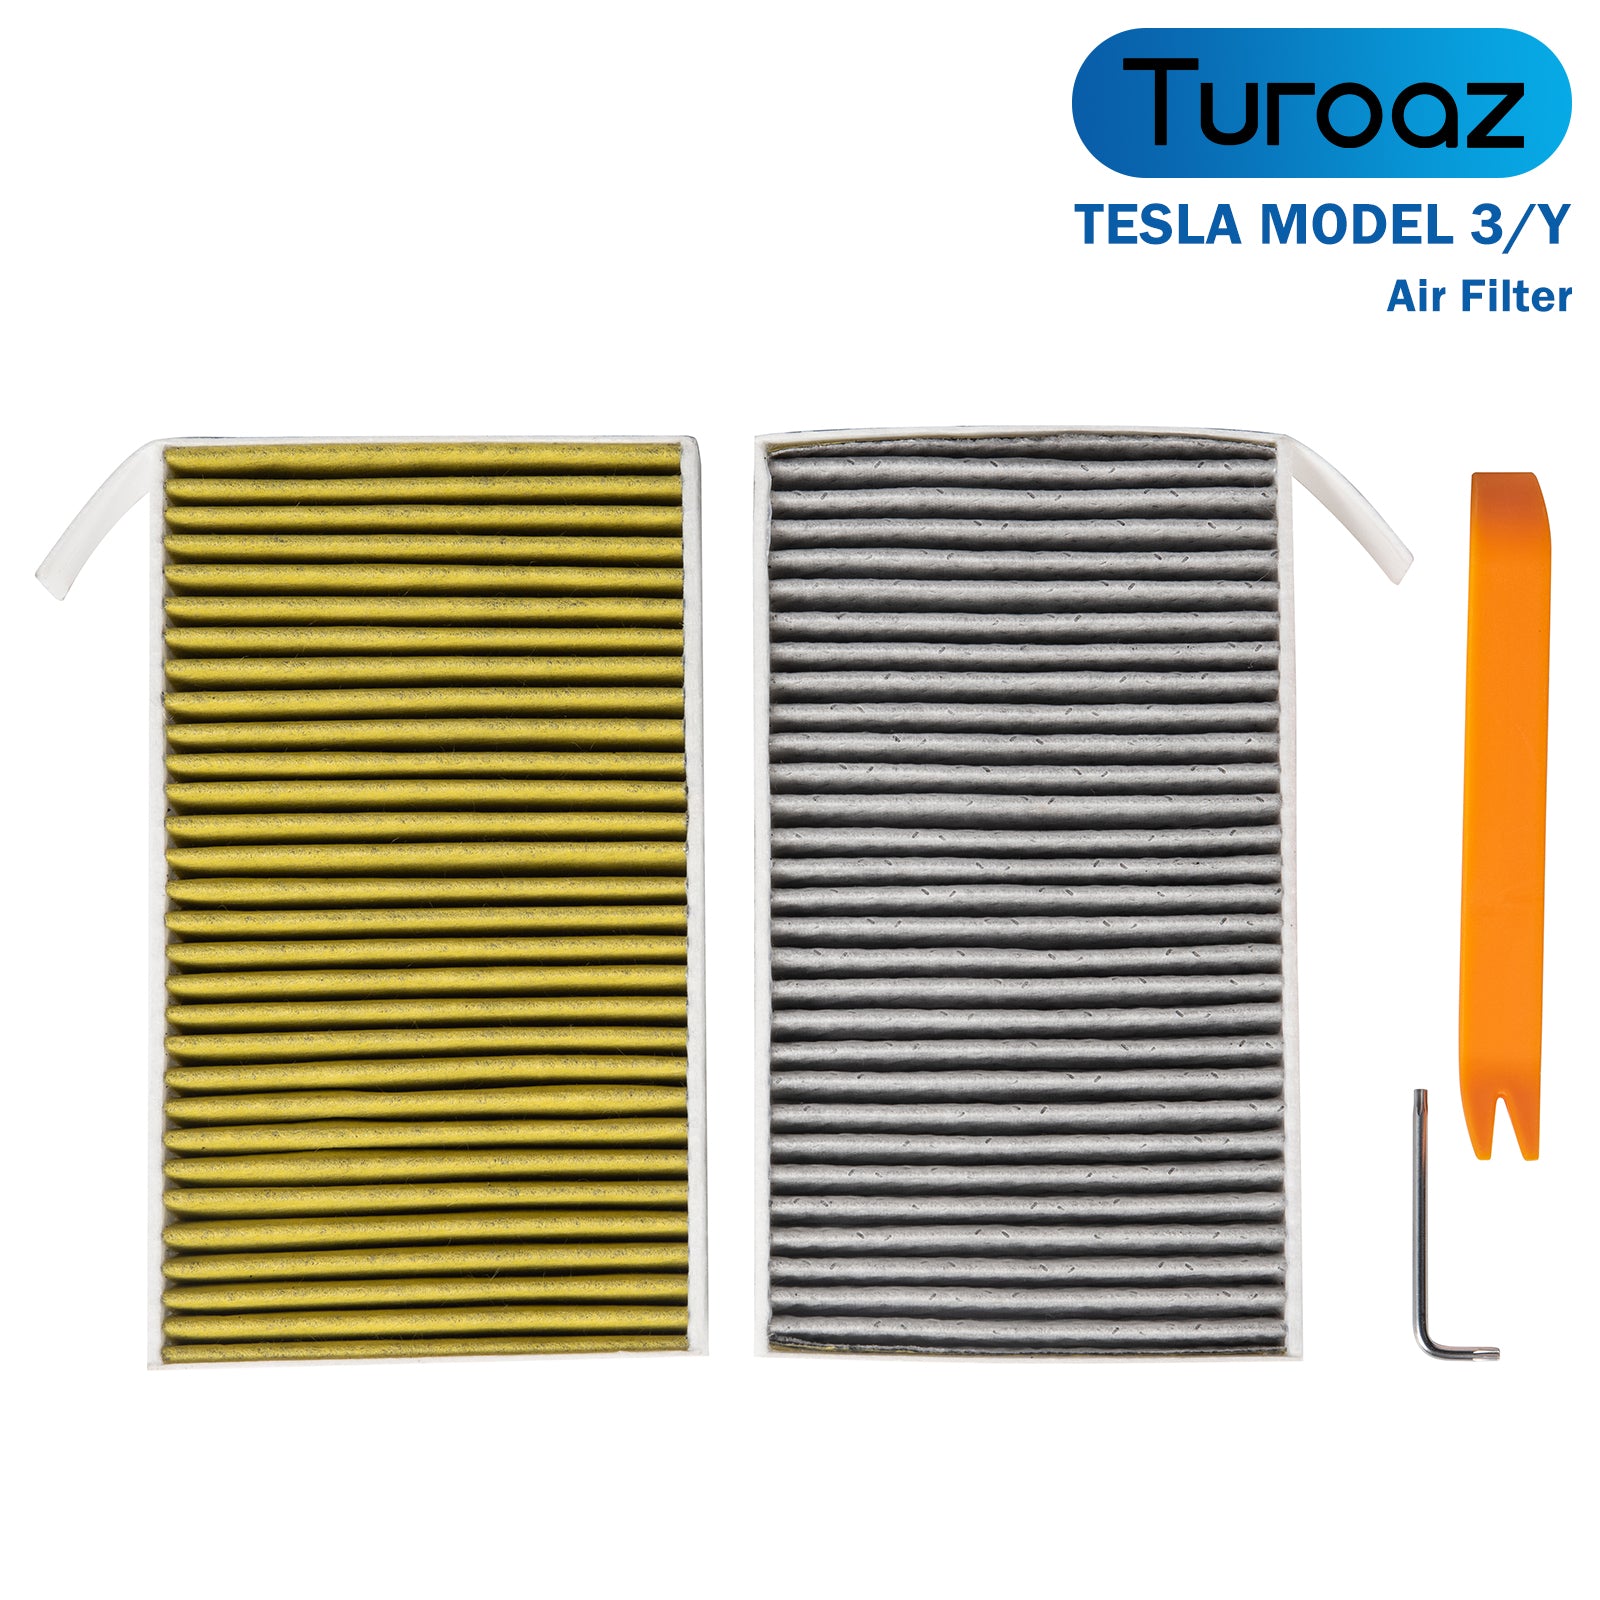 Turoaz Air Filter Fit For Tesla Model 3 Model Y 2017+, Activated Carbo